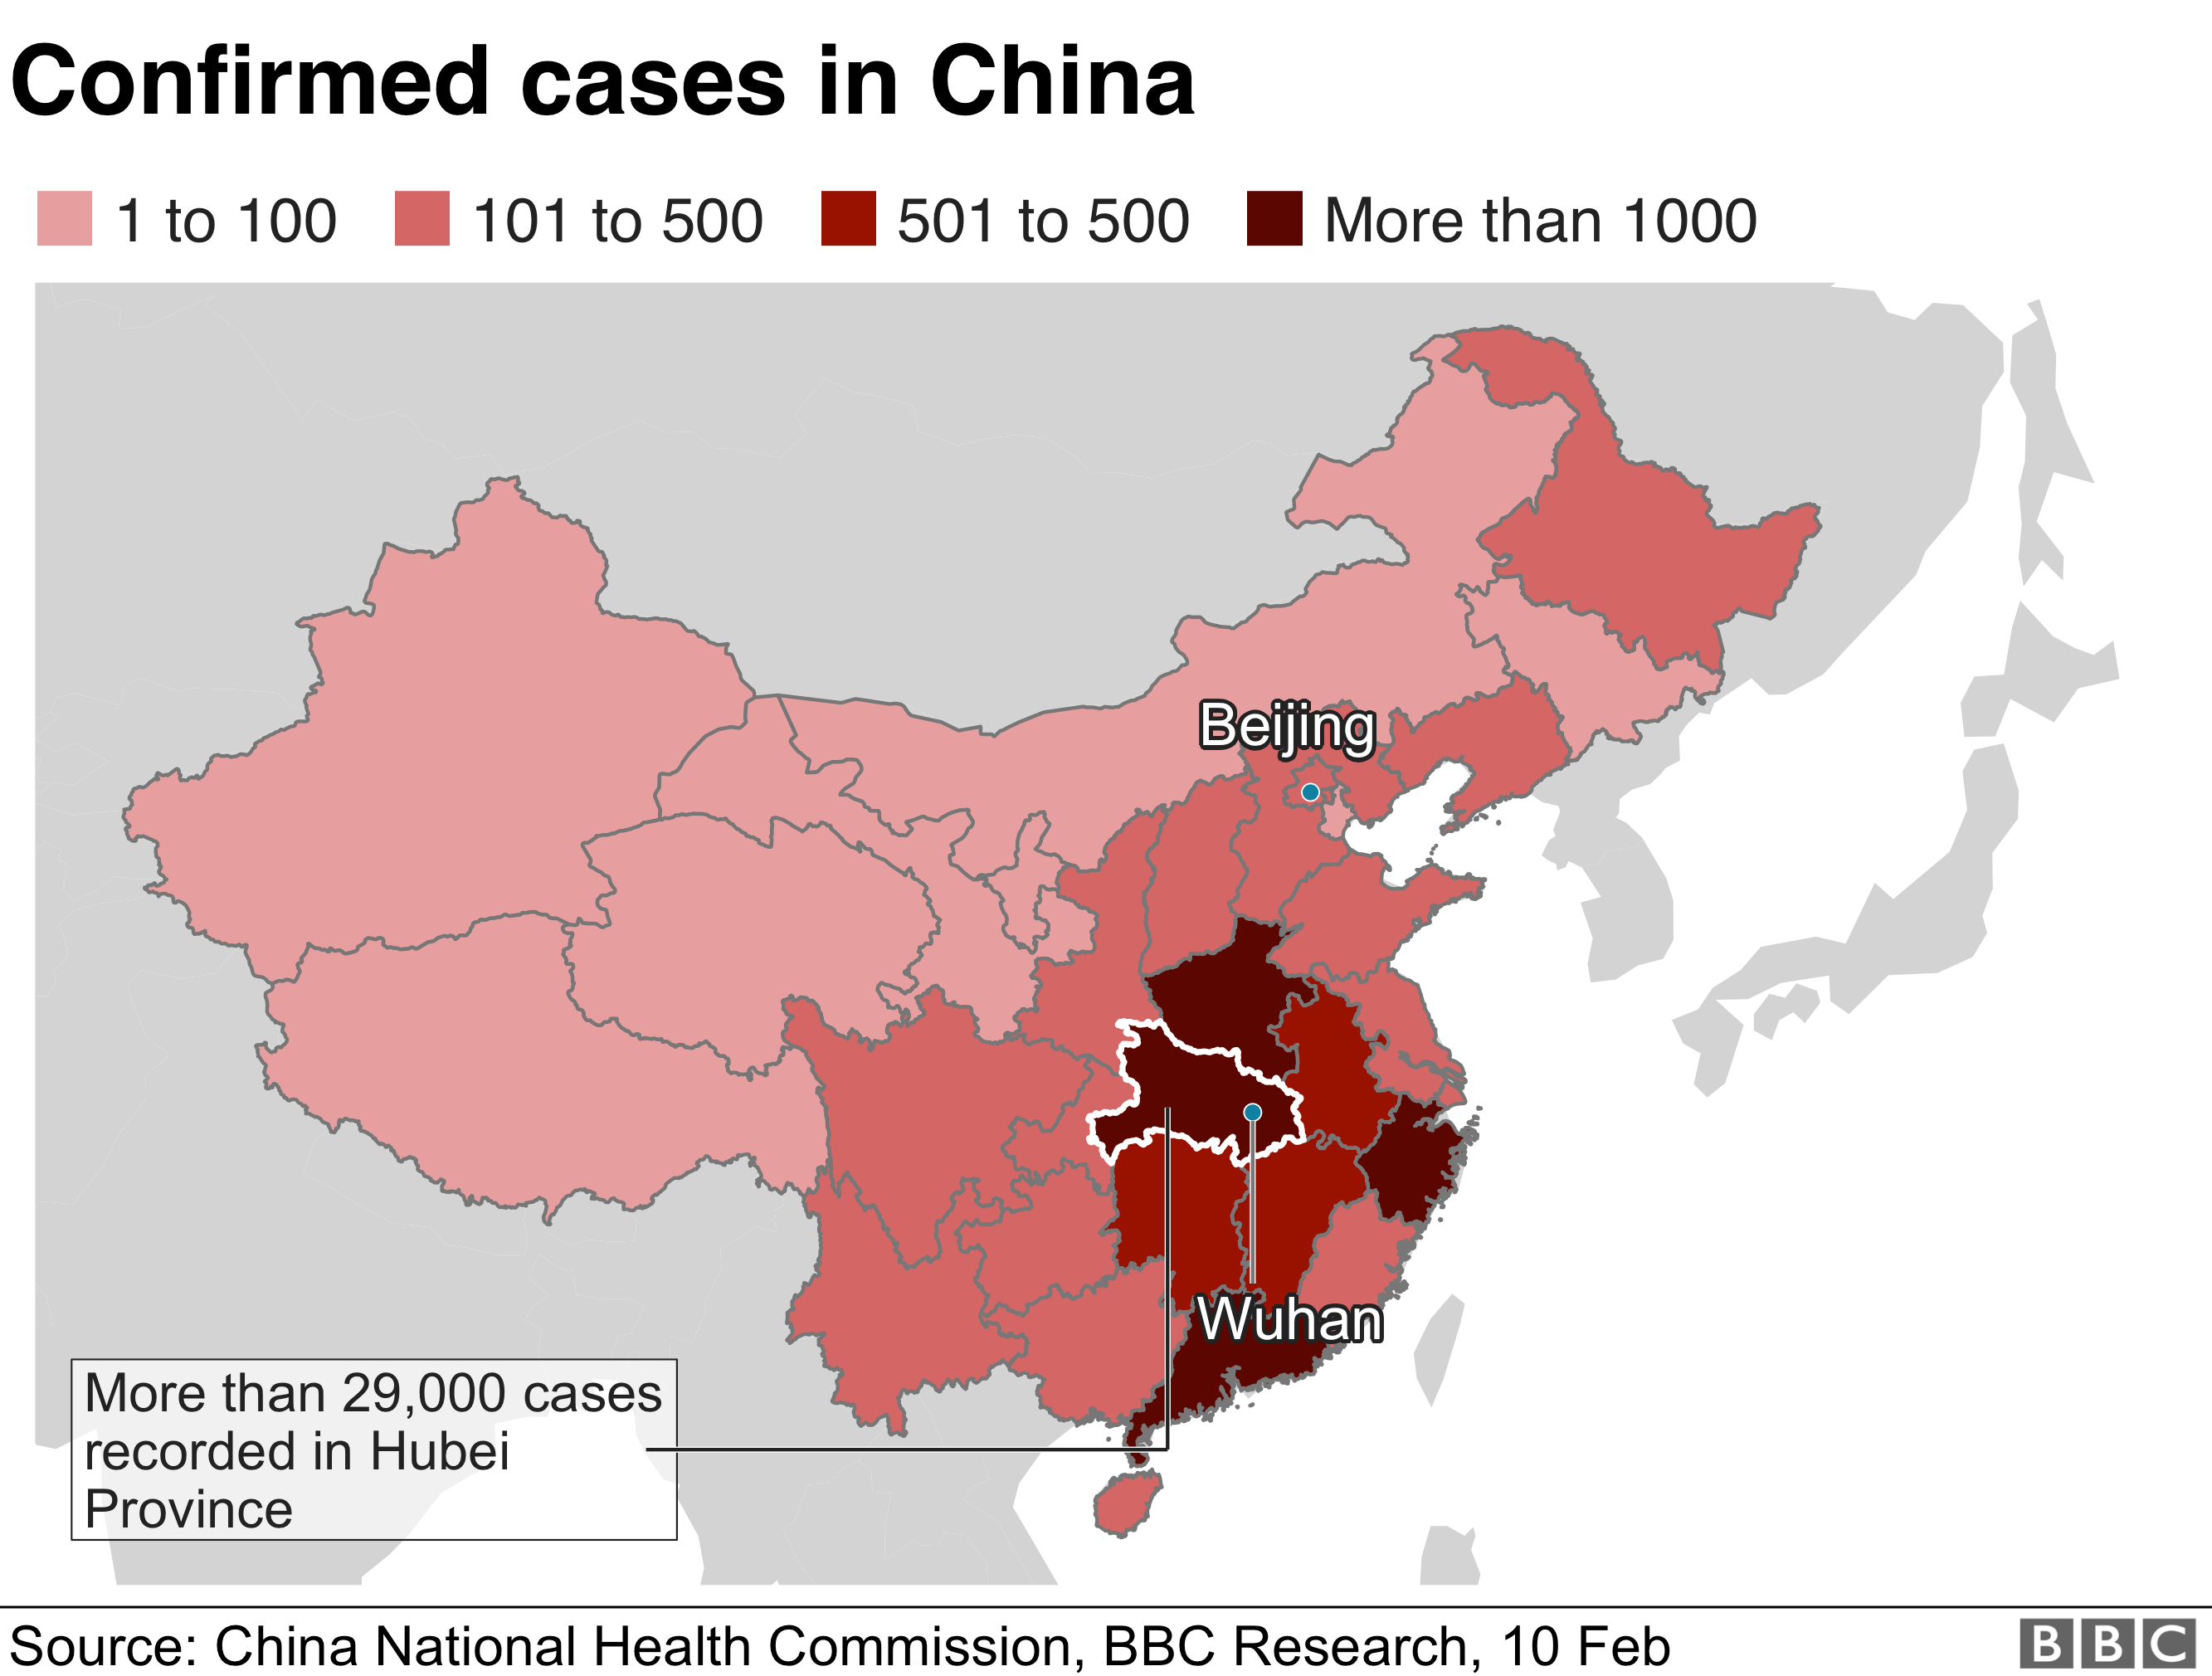 Map showing confirmed cases in China